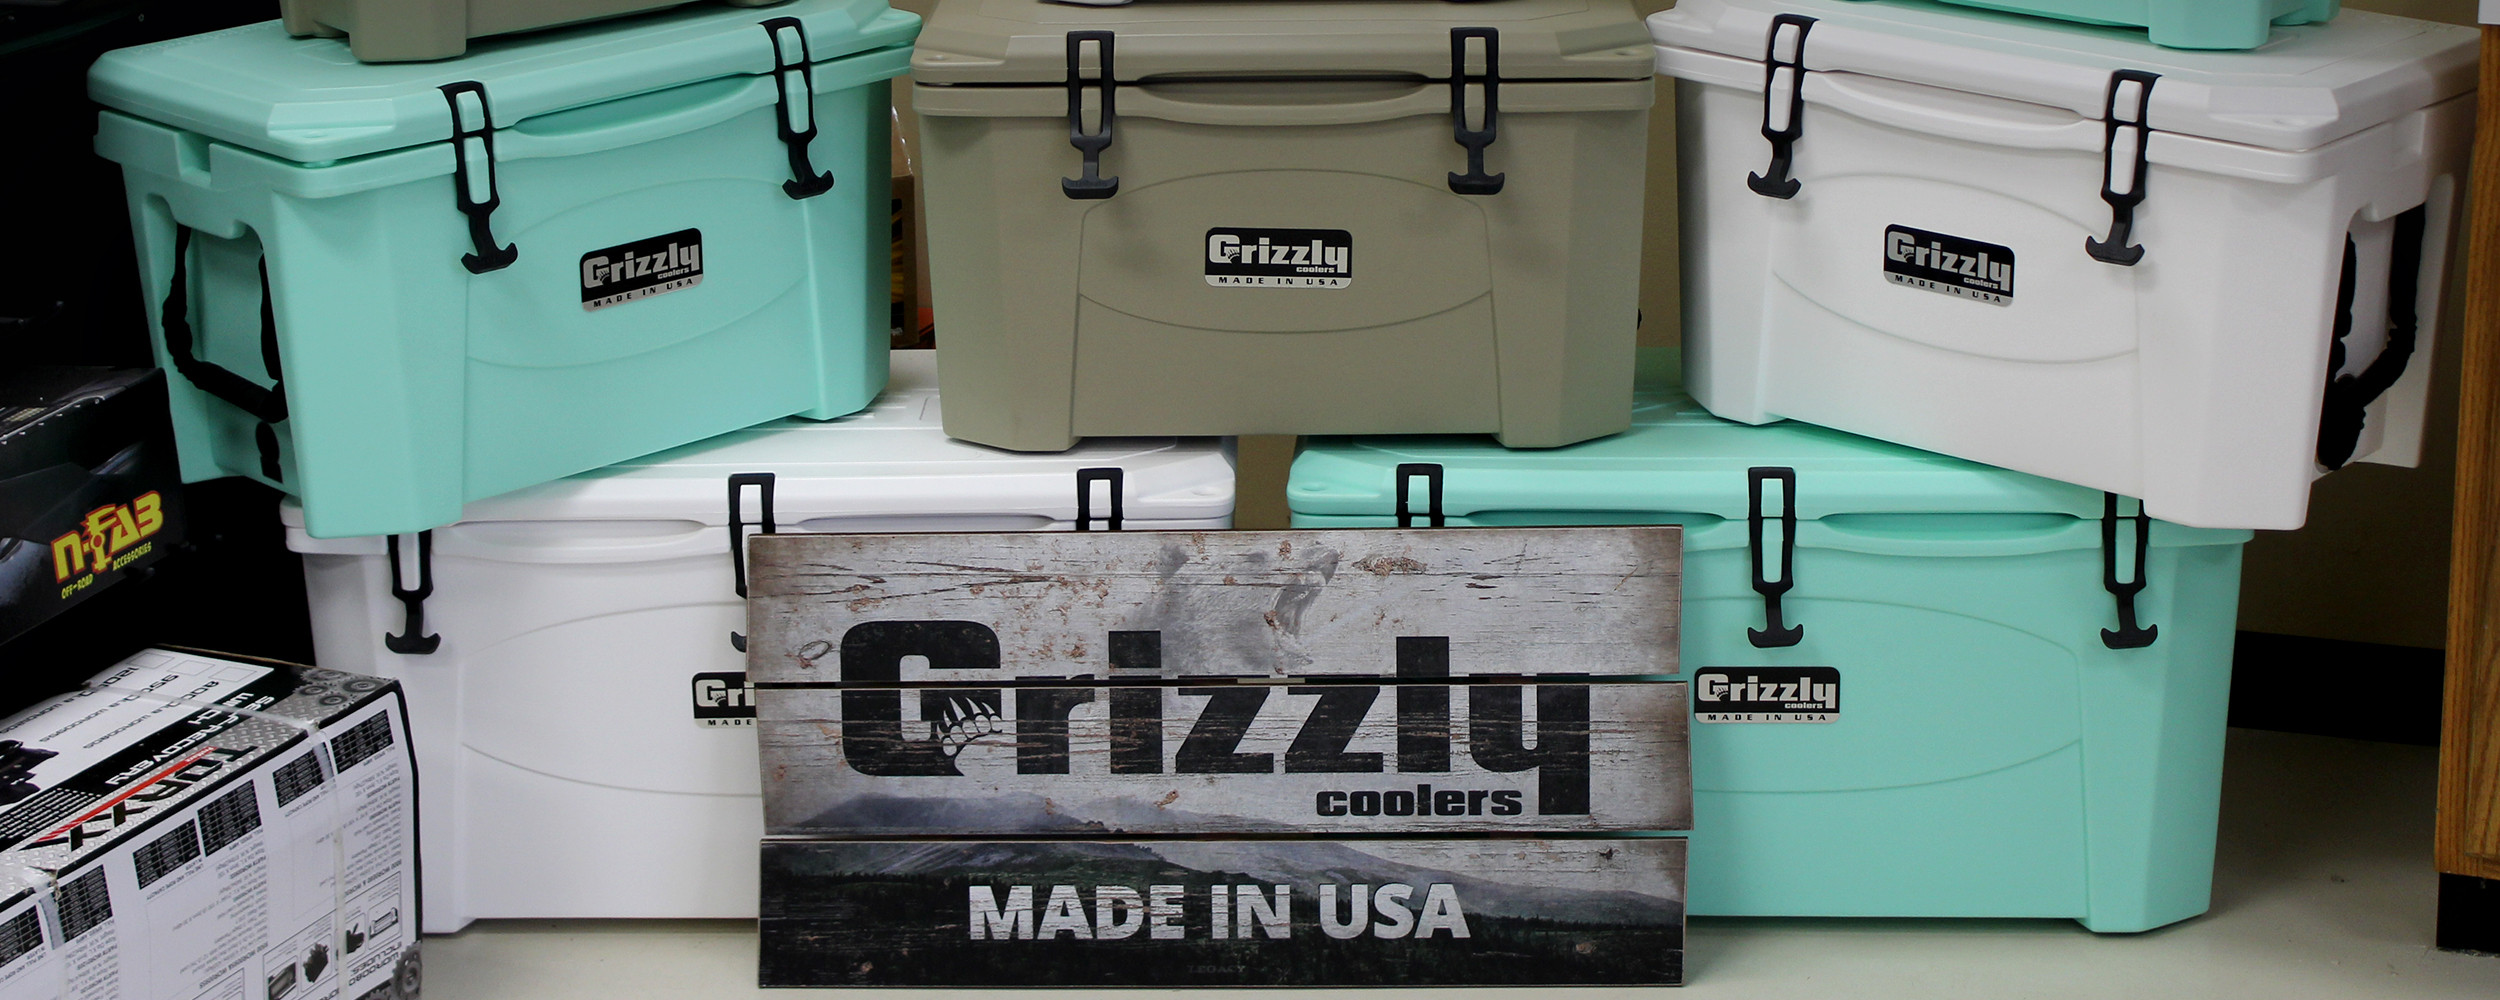 Honest Grizzly Cooler Review - All Sizes | Read Before You Buy (2020)